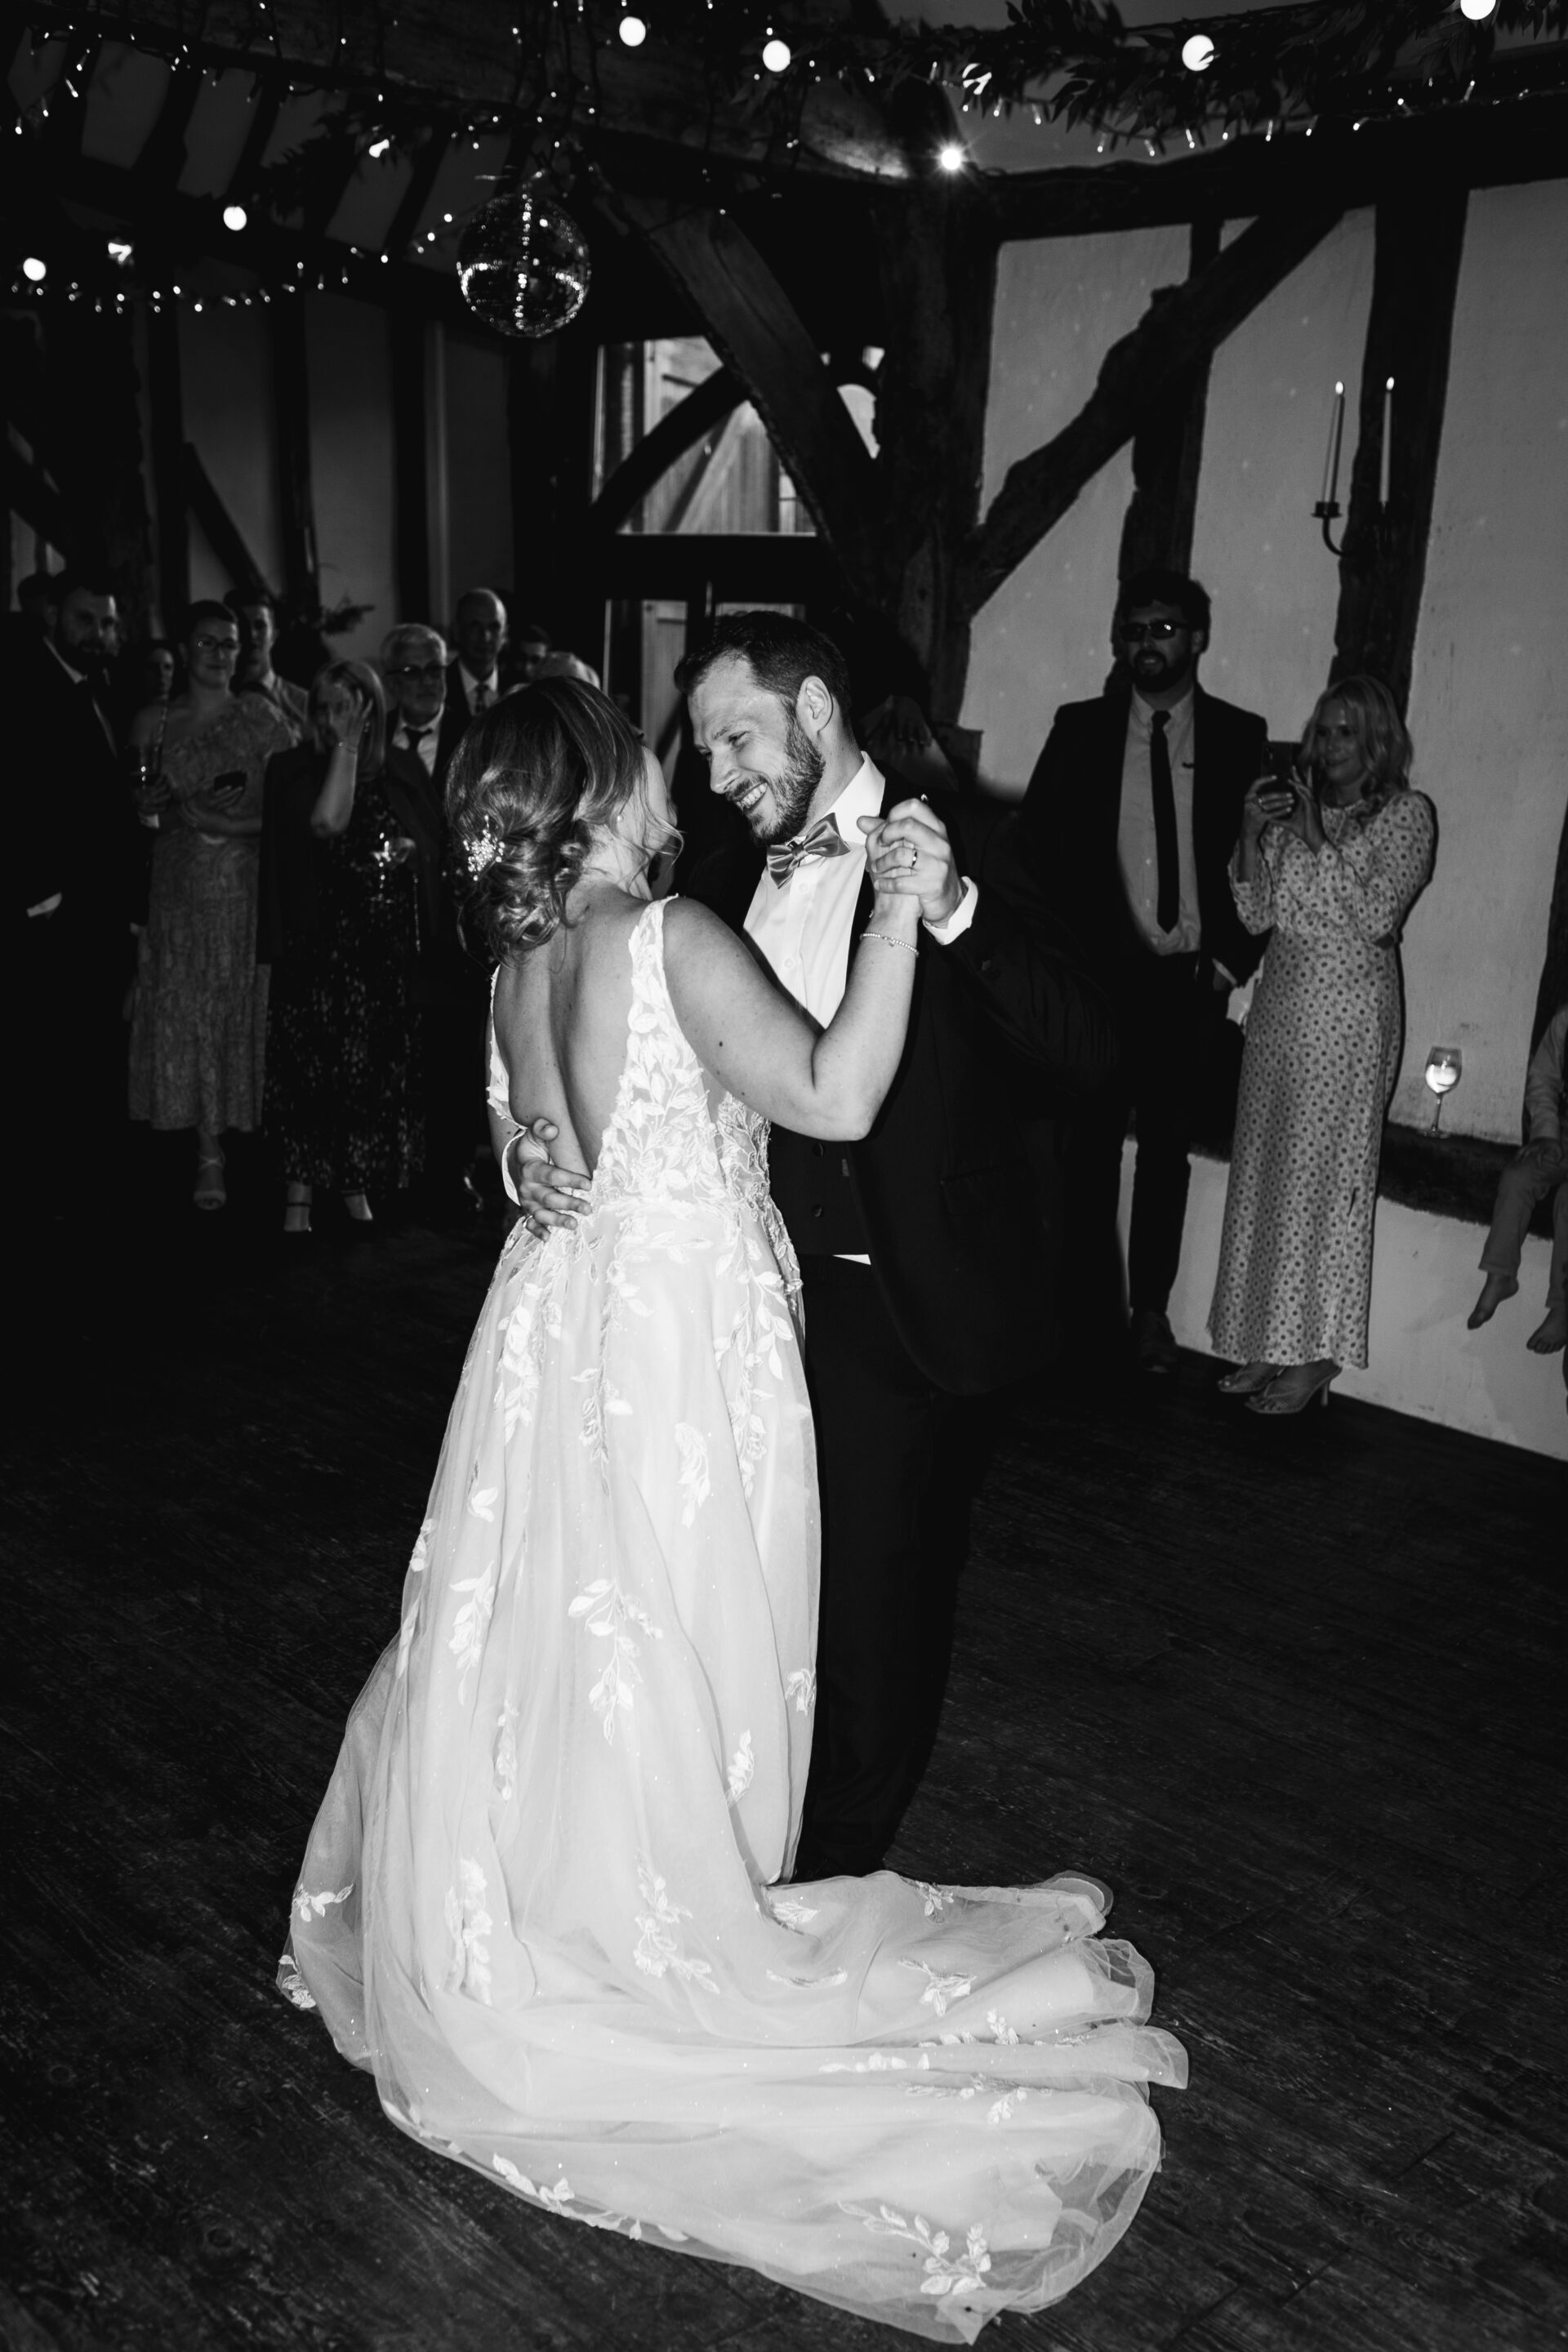 The bride and groom perform their first dance at Old Luxters Barn wedding venue in Oxfordshire